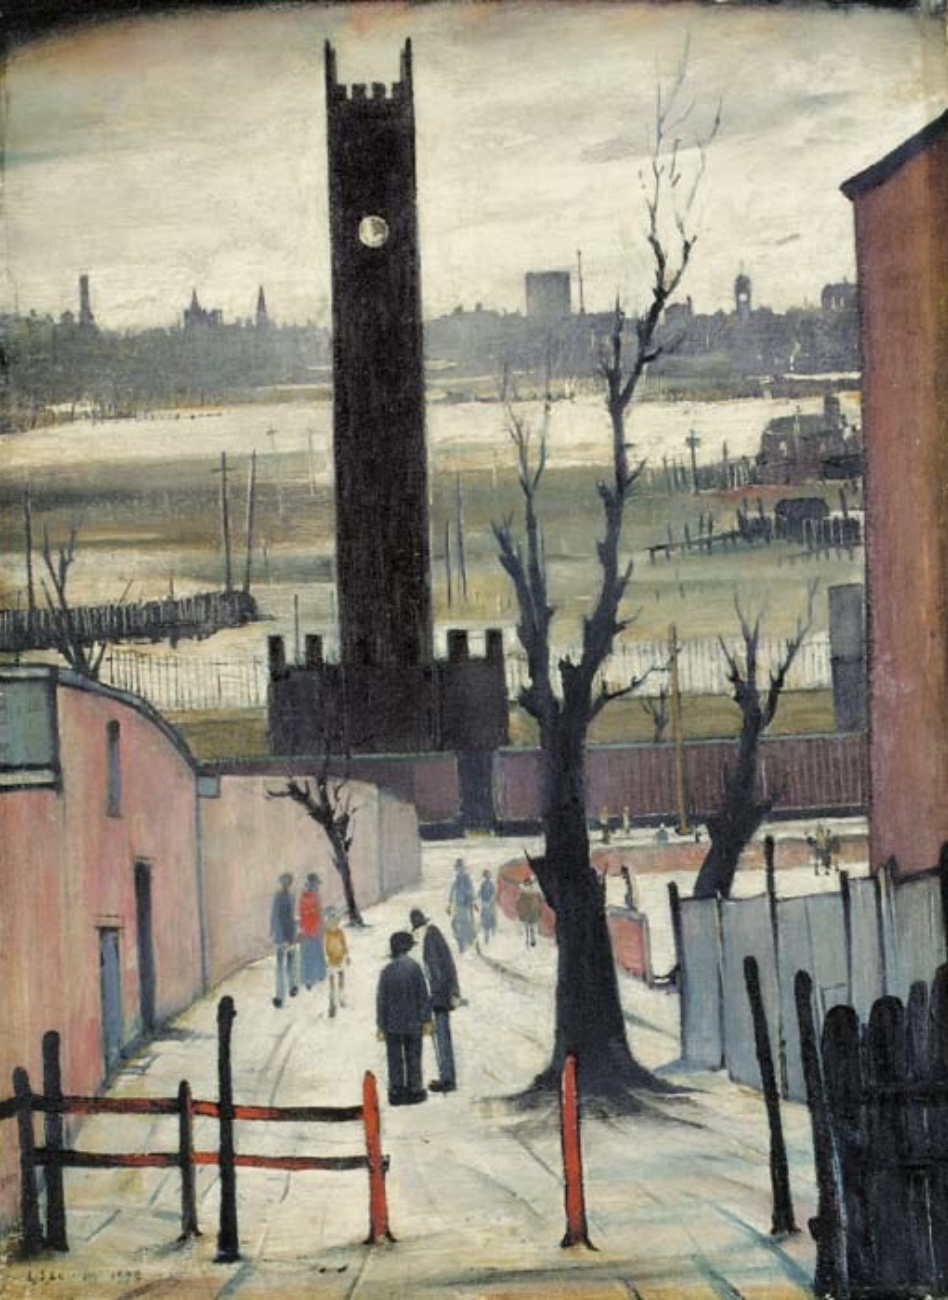 The Black Tower (1938) by Laurence Stephen Lowry (1887 - 1976), English artist.